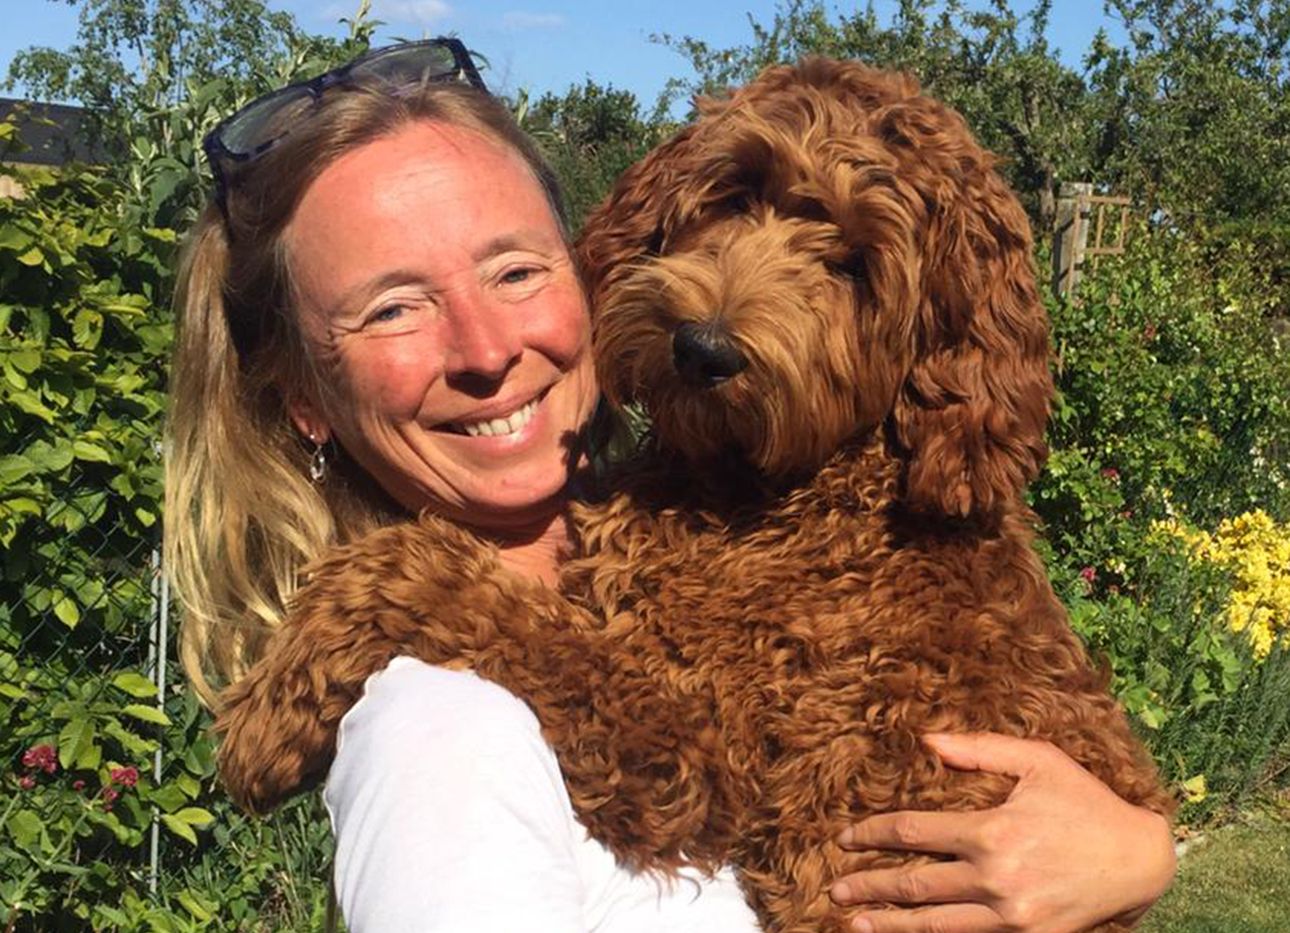 Dr. Kate McLean smiles and holds her dog in a garden.